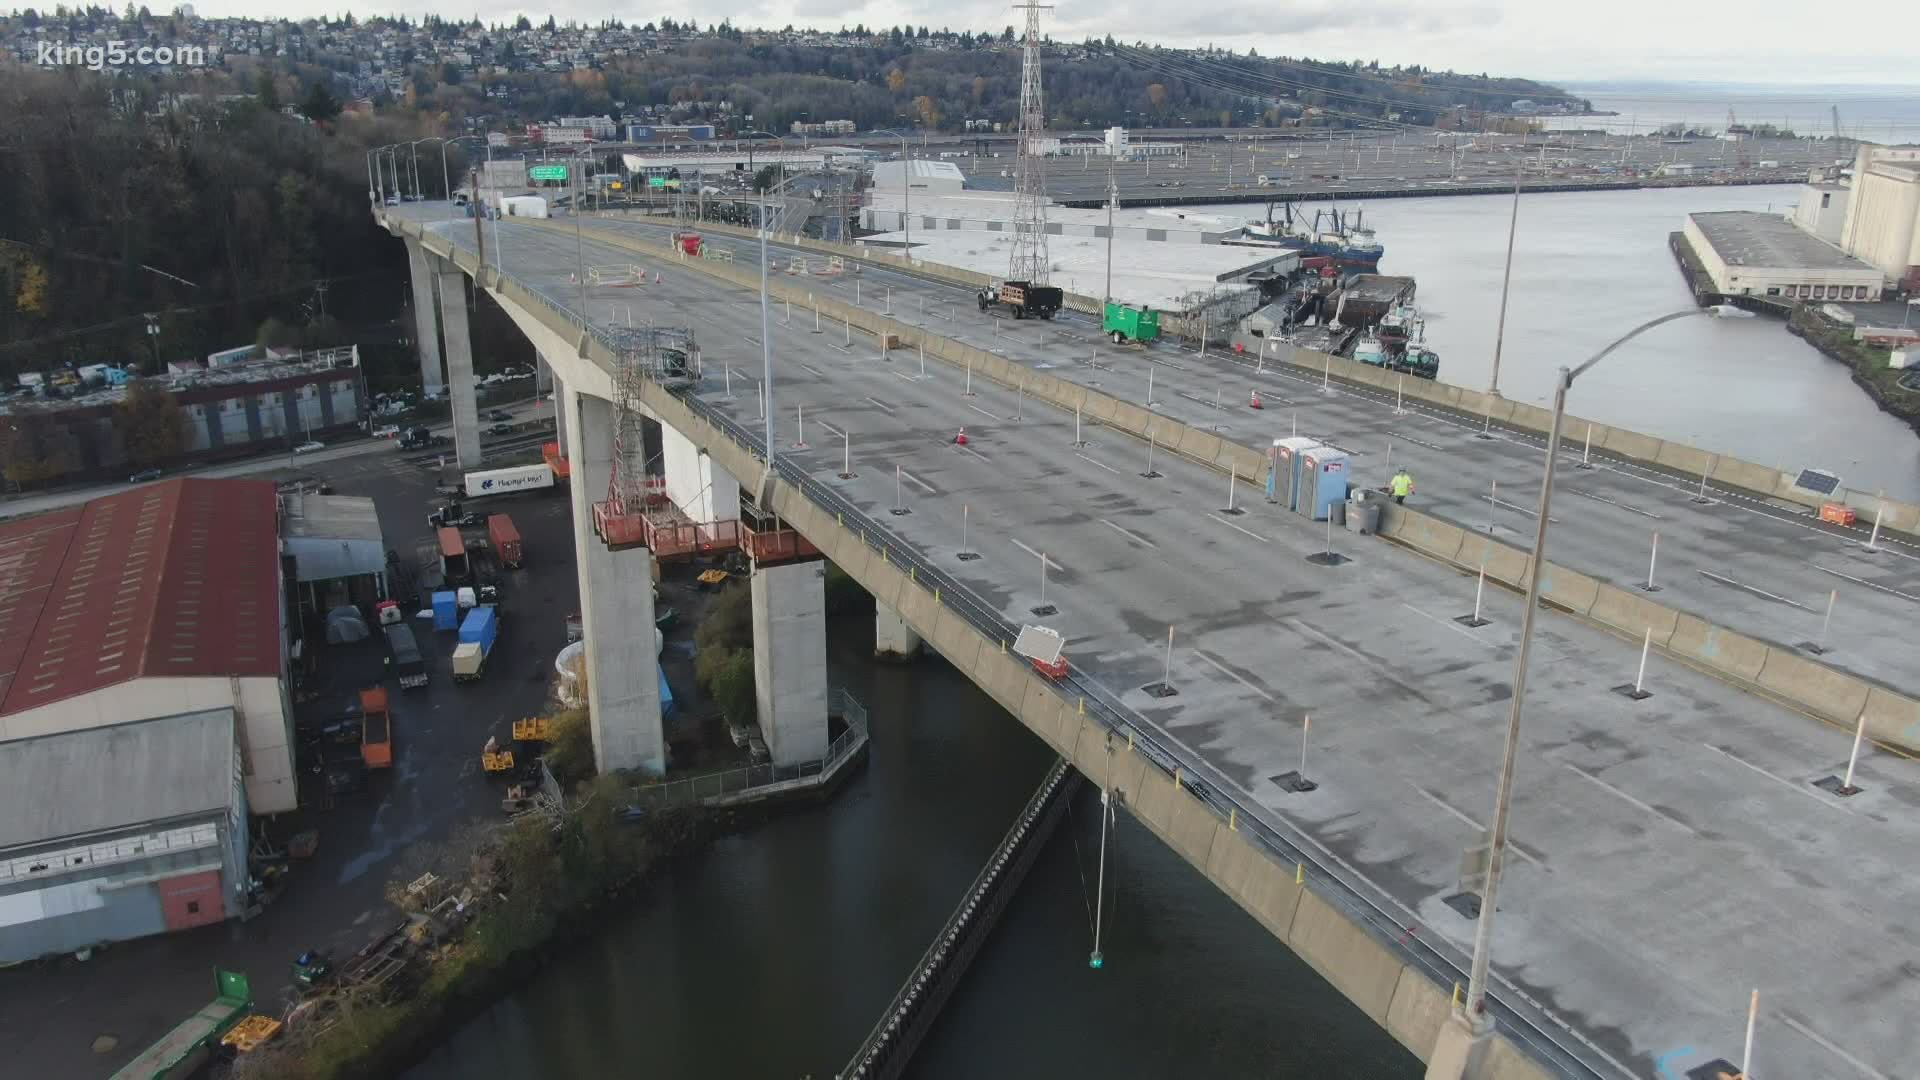 Repair work would add 15-40 years to Seattle's most used bridge.